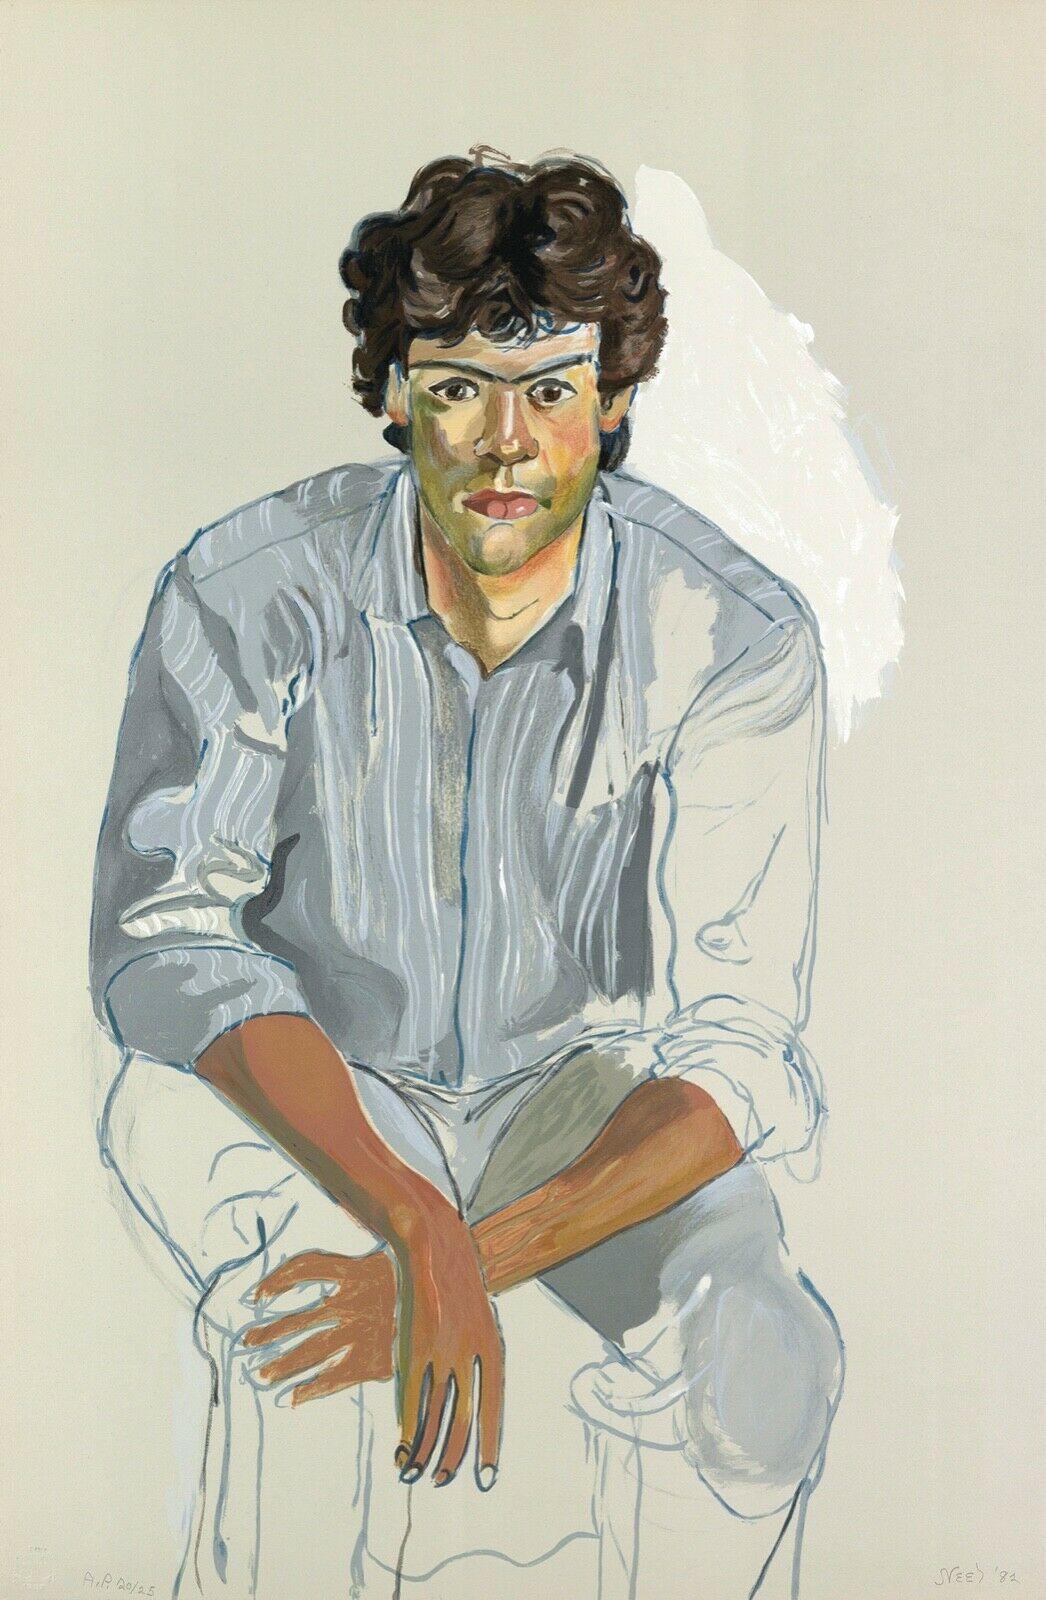 Artist: Alice Neel (1900-1984)
Title: The Youth (John Cheim)
Year: 1982
Medium: Lithograph on Arches paper
Edition: 20/25 A.P.
Size: 38 x 24 inches
Condition: Excellent
Inscription: Signed and numbered by the artist.
Notes: Published by Eleanor